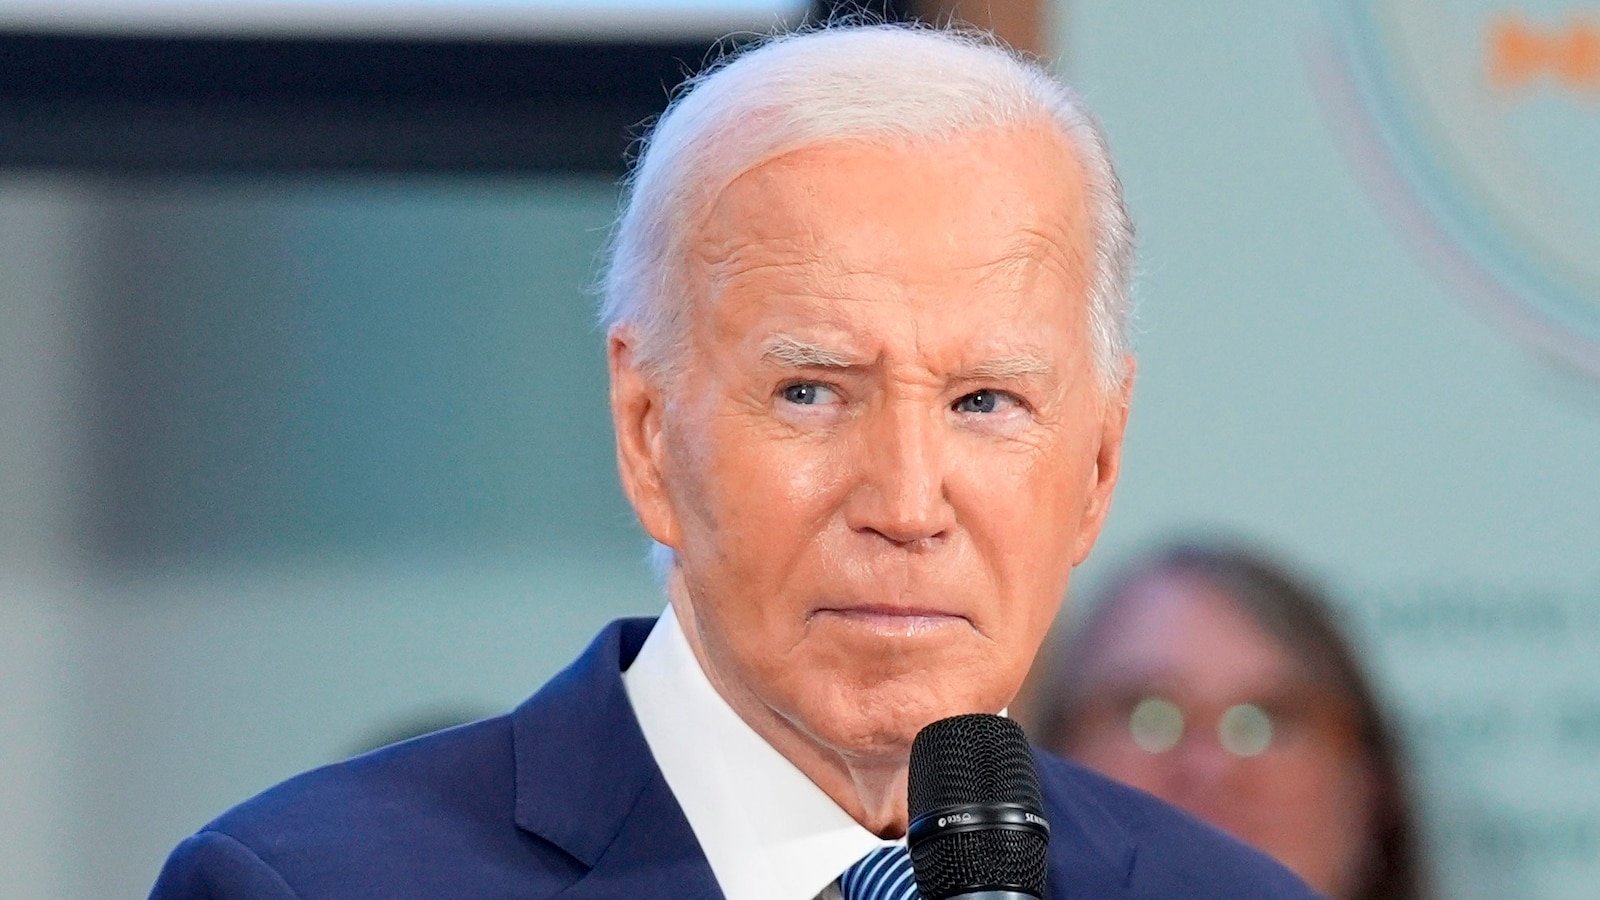 2024 election live updates: Biden faces growing calls for him to drop out